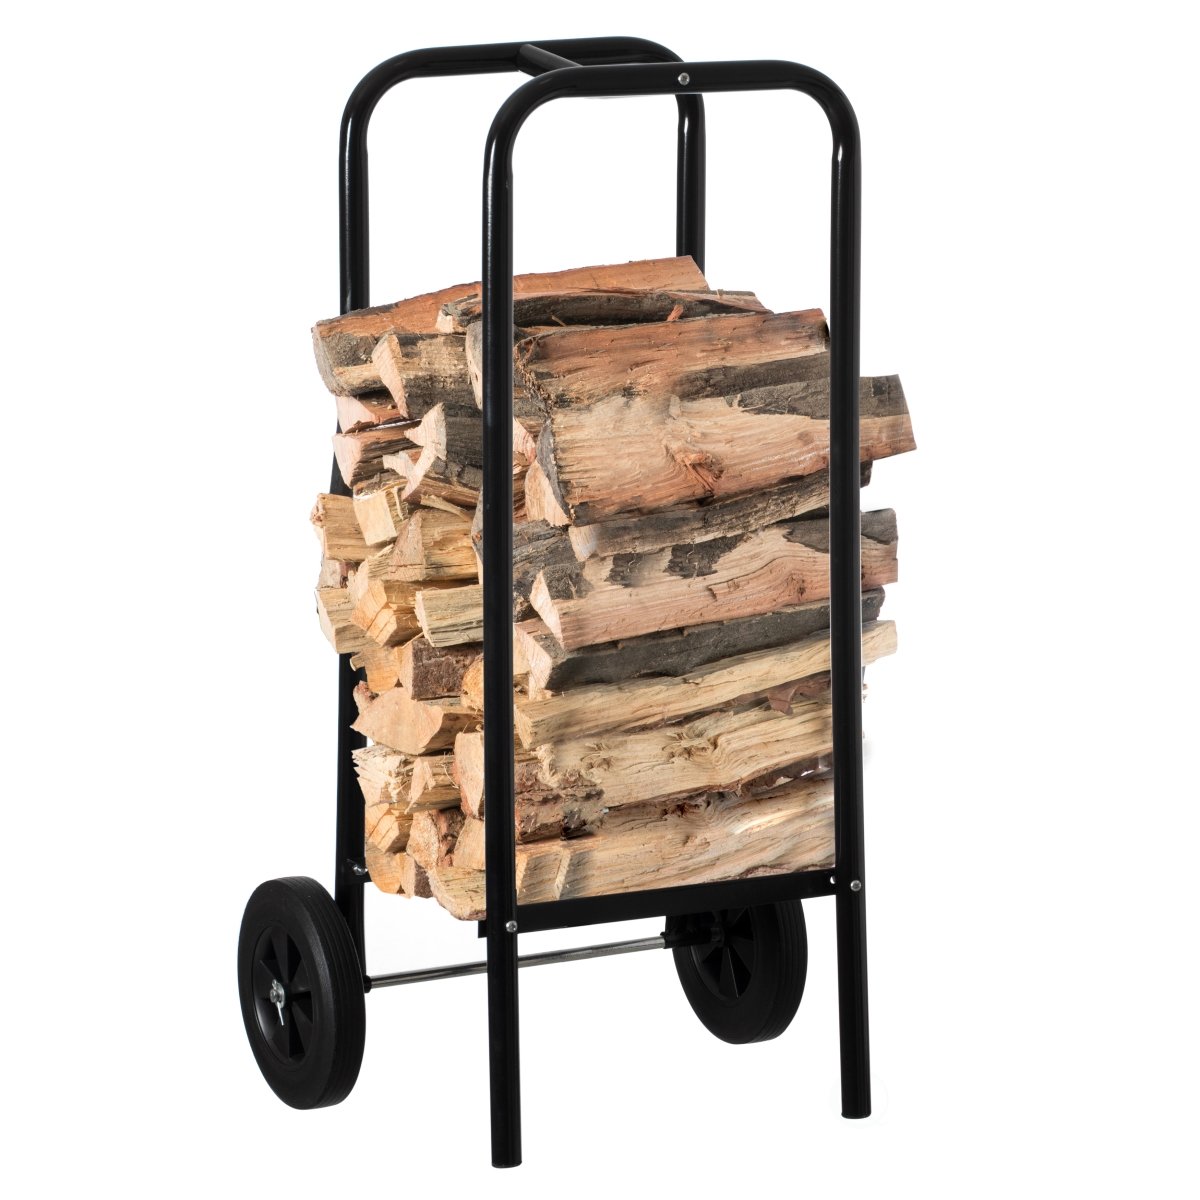 Picture of Gardenised QI004520 Indoor and Outdoor Patio Steel Firewood Log Carrier, Wood Rack Storage Stacking Holder, Black